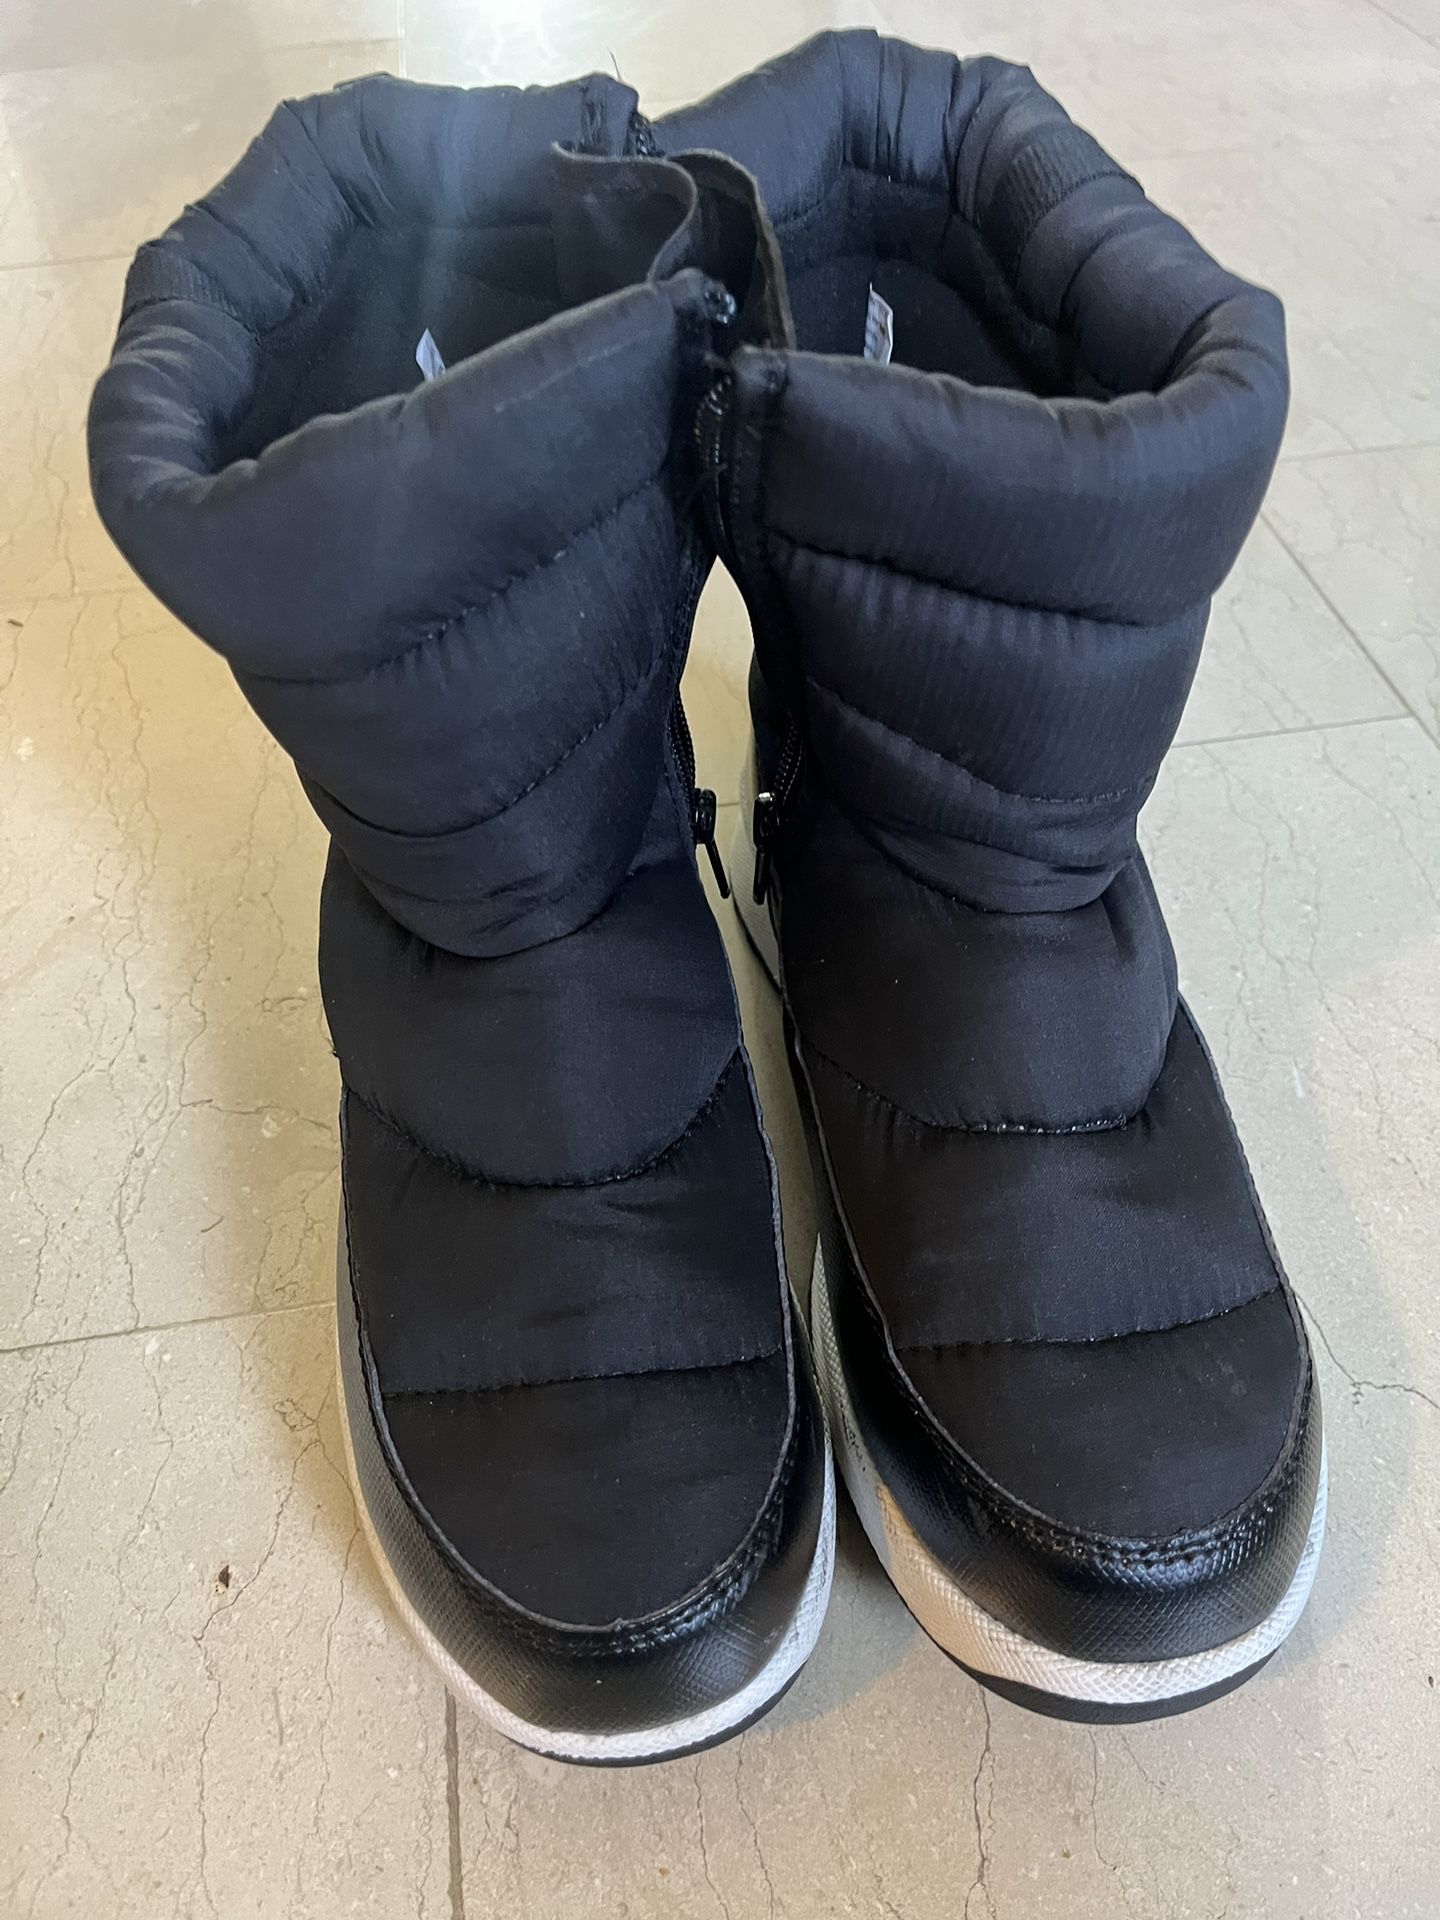 Woman’s Winter Boots $5